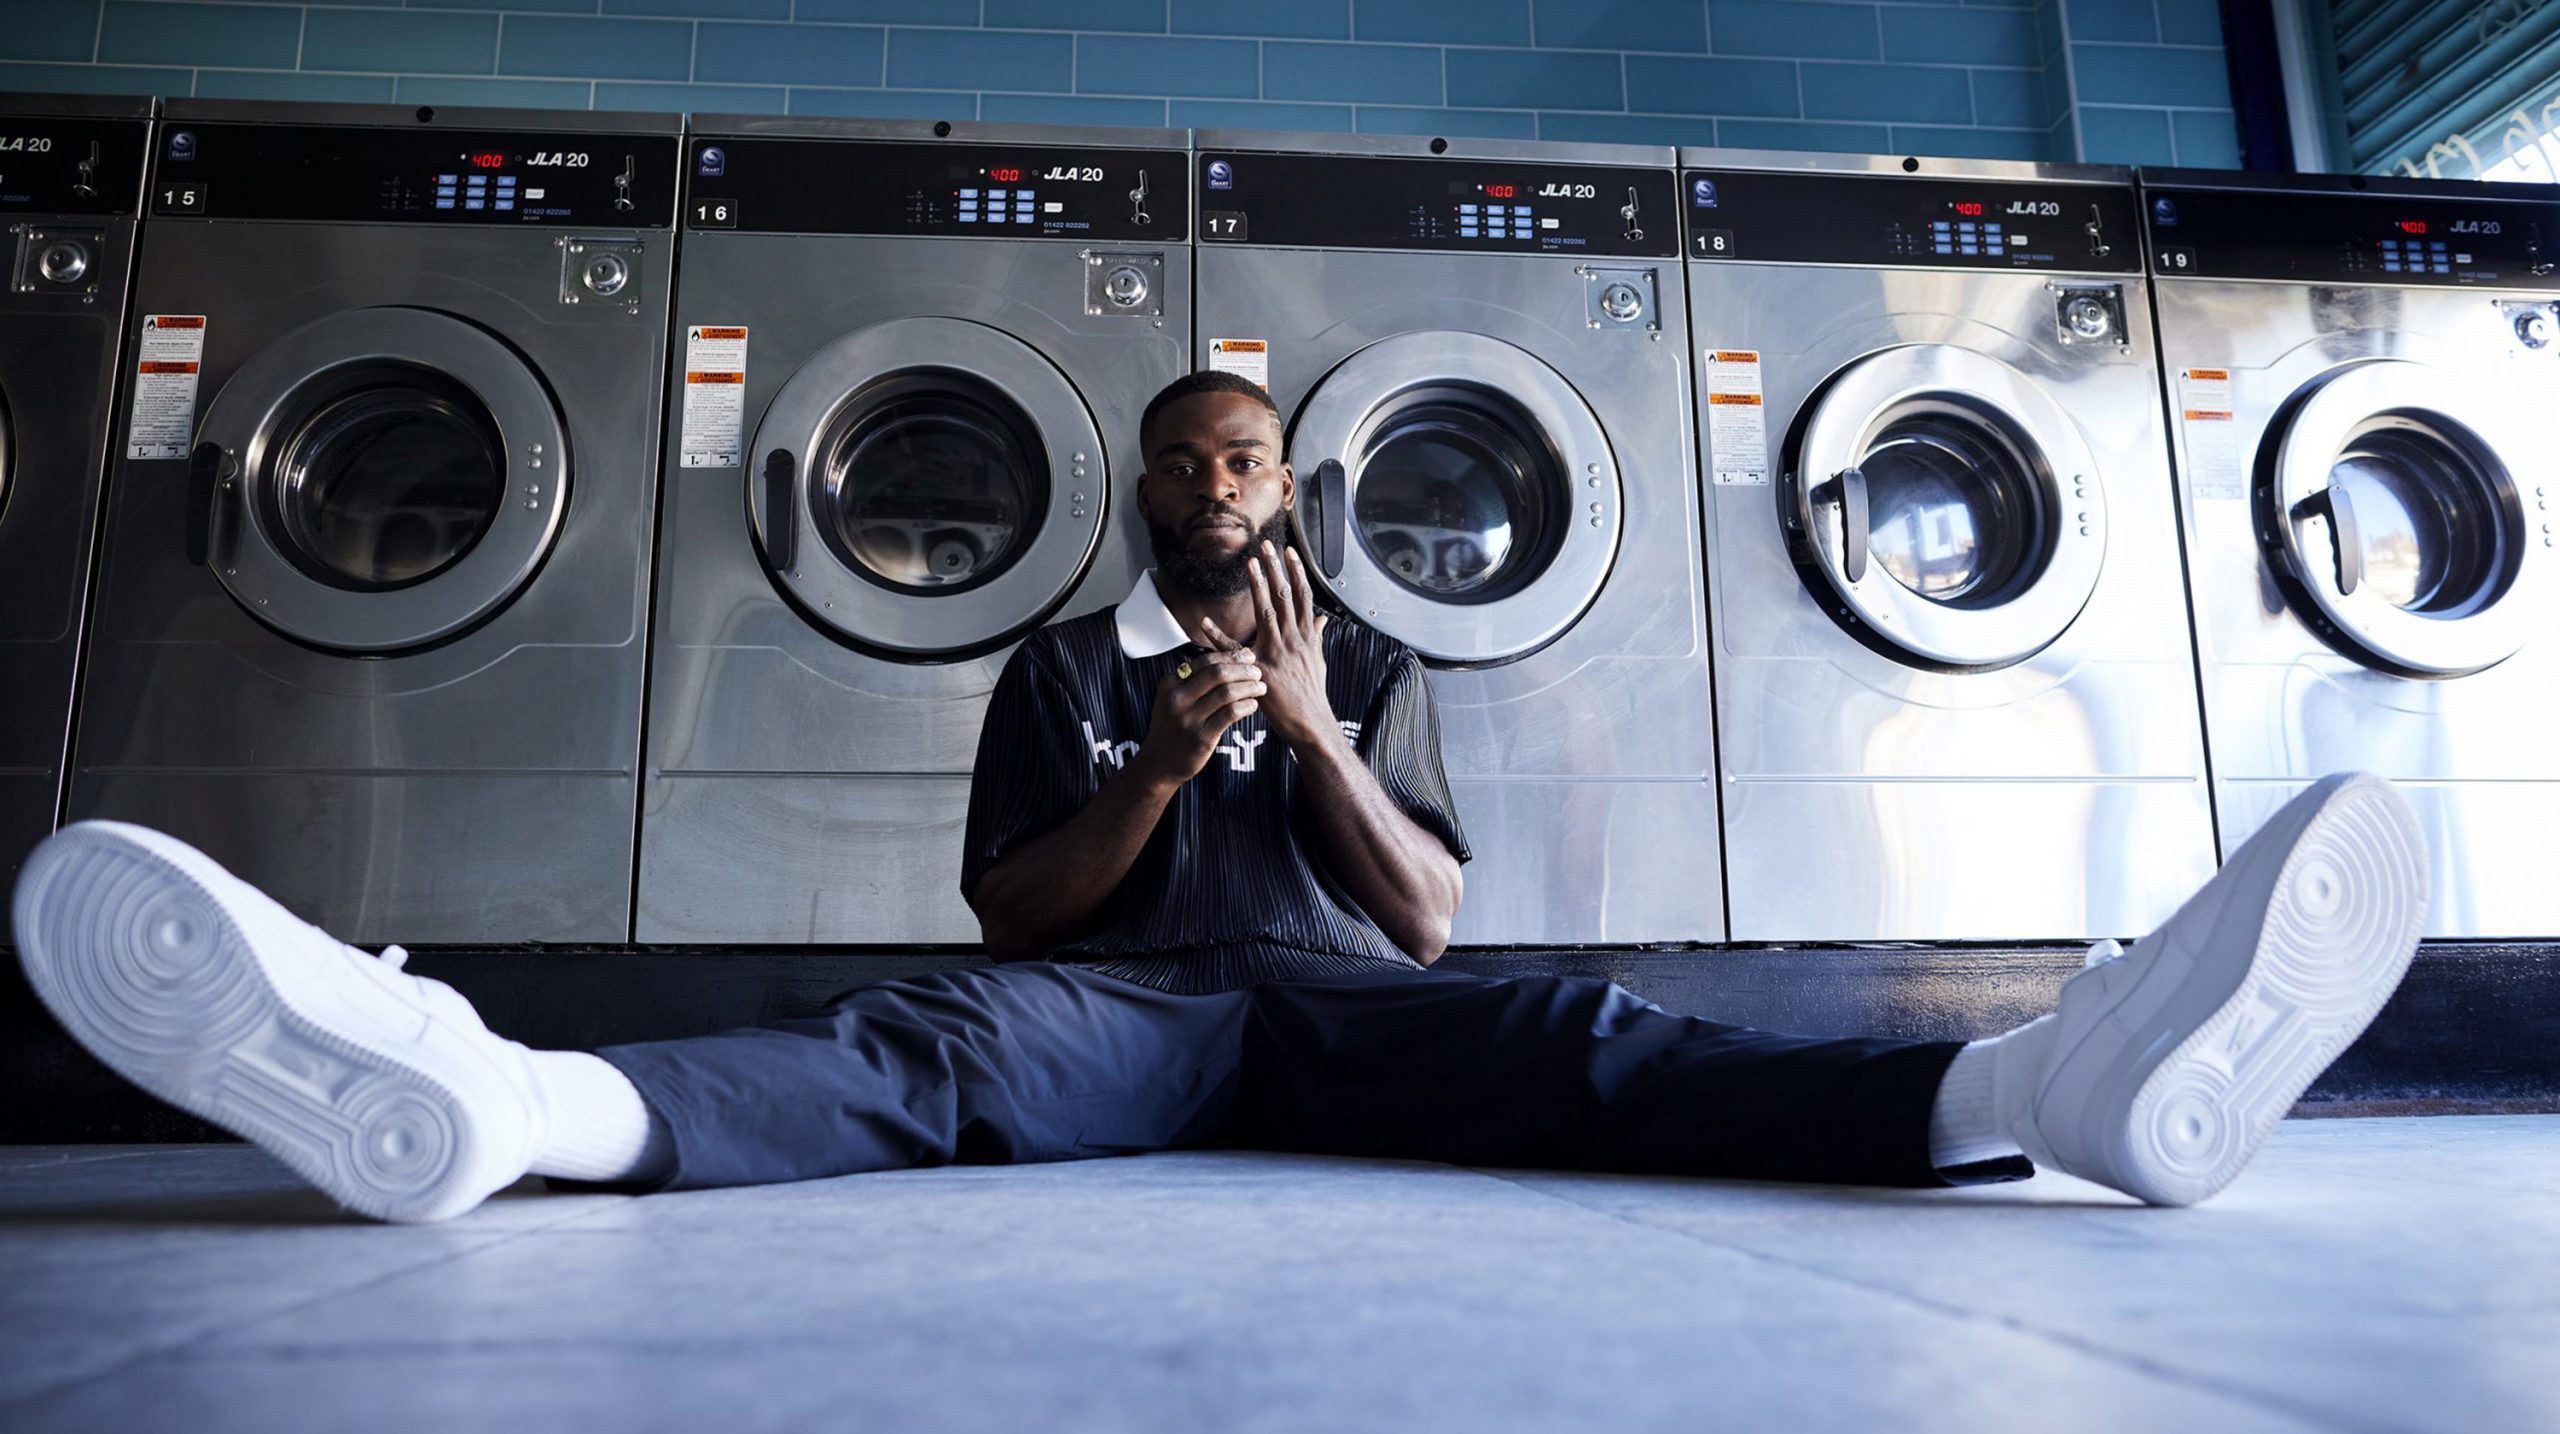 Joshua Buatsi sat on the floor with his legs out wide under some clothes washing machines